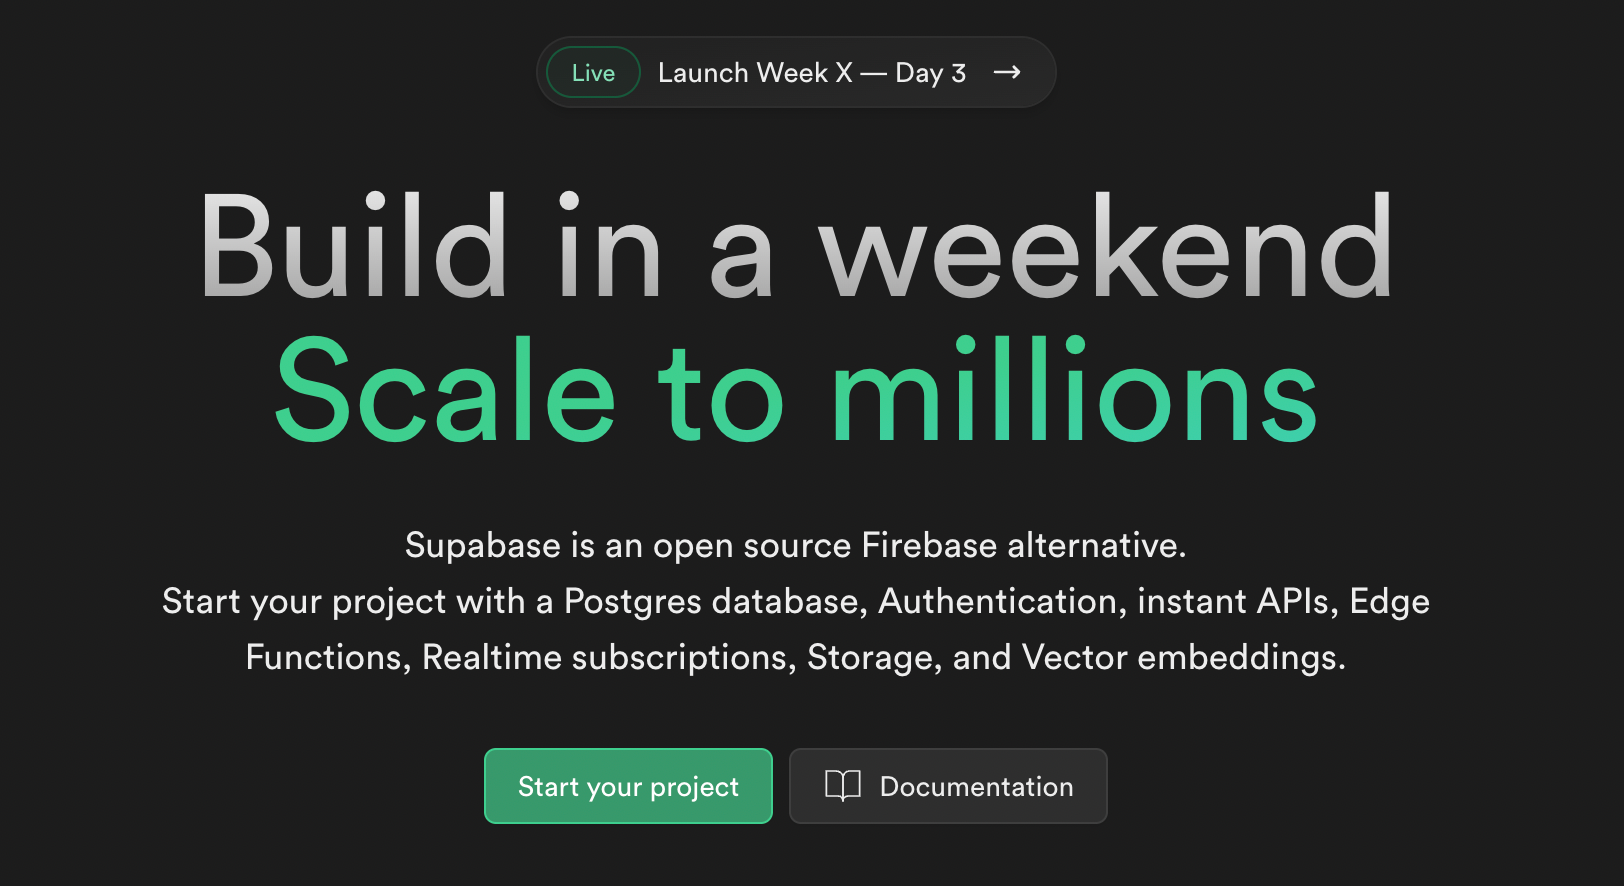 Supabase landing page. Text: Build in a weekend, Scale to millions